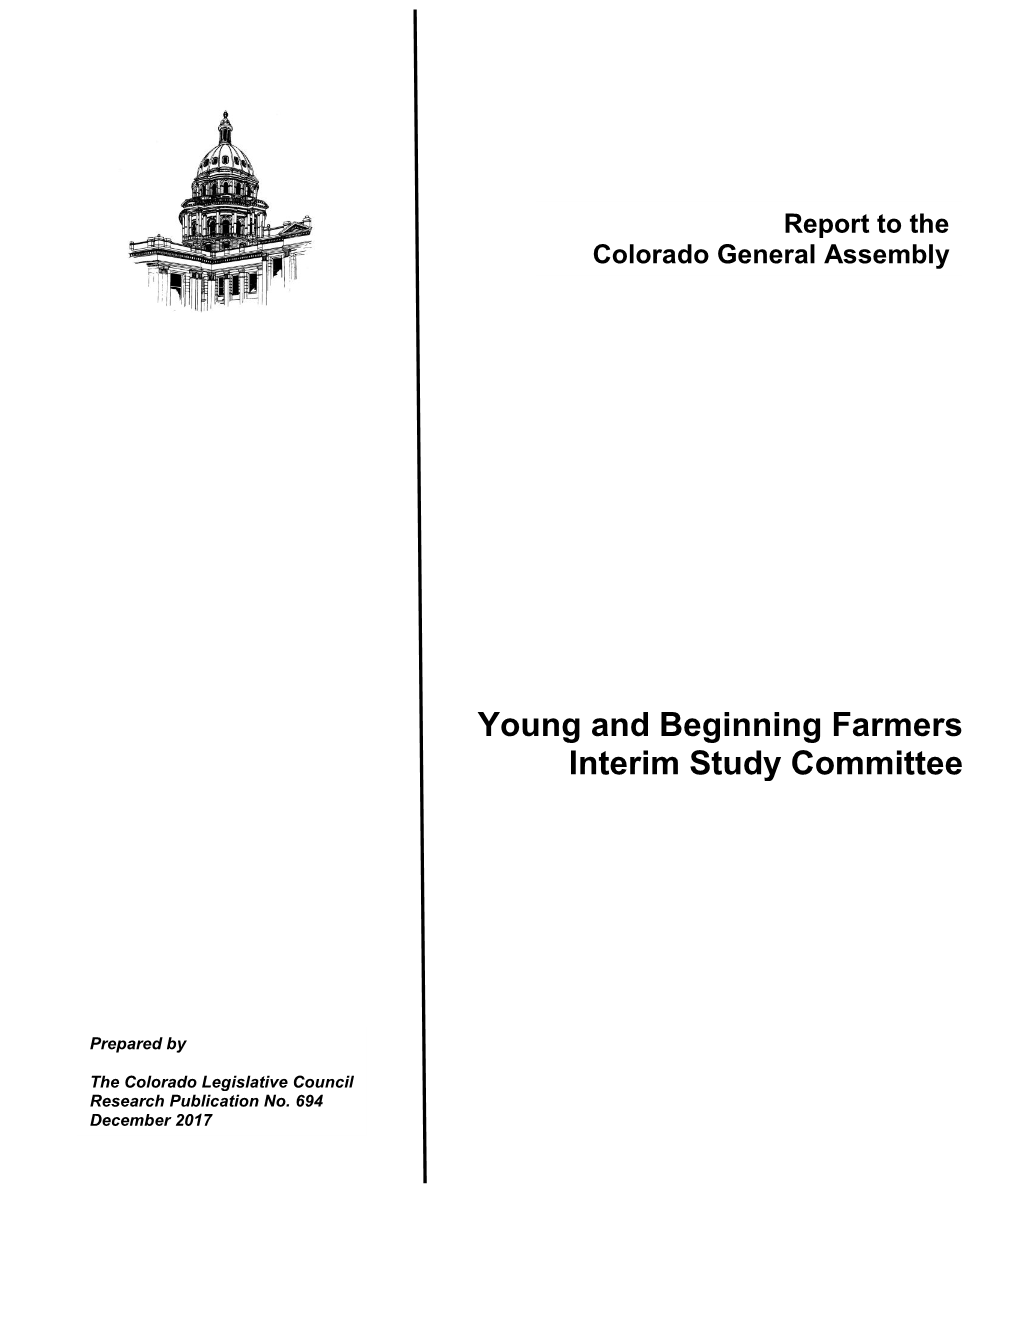 Young and Beginning Farmers Interim Study Committee